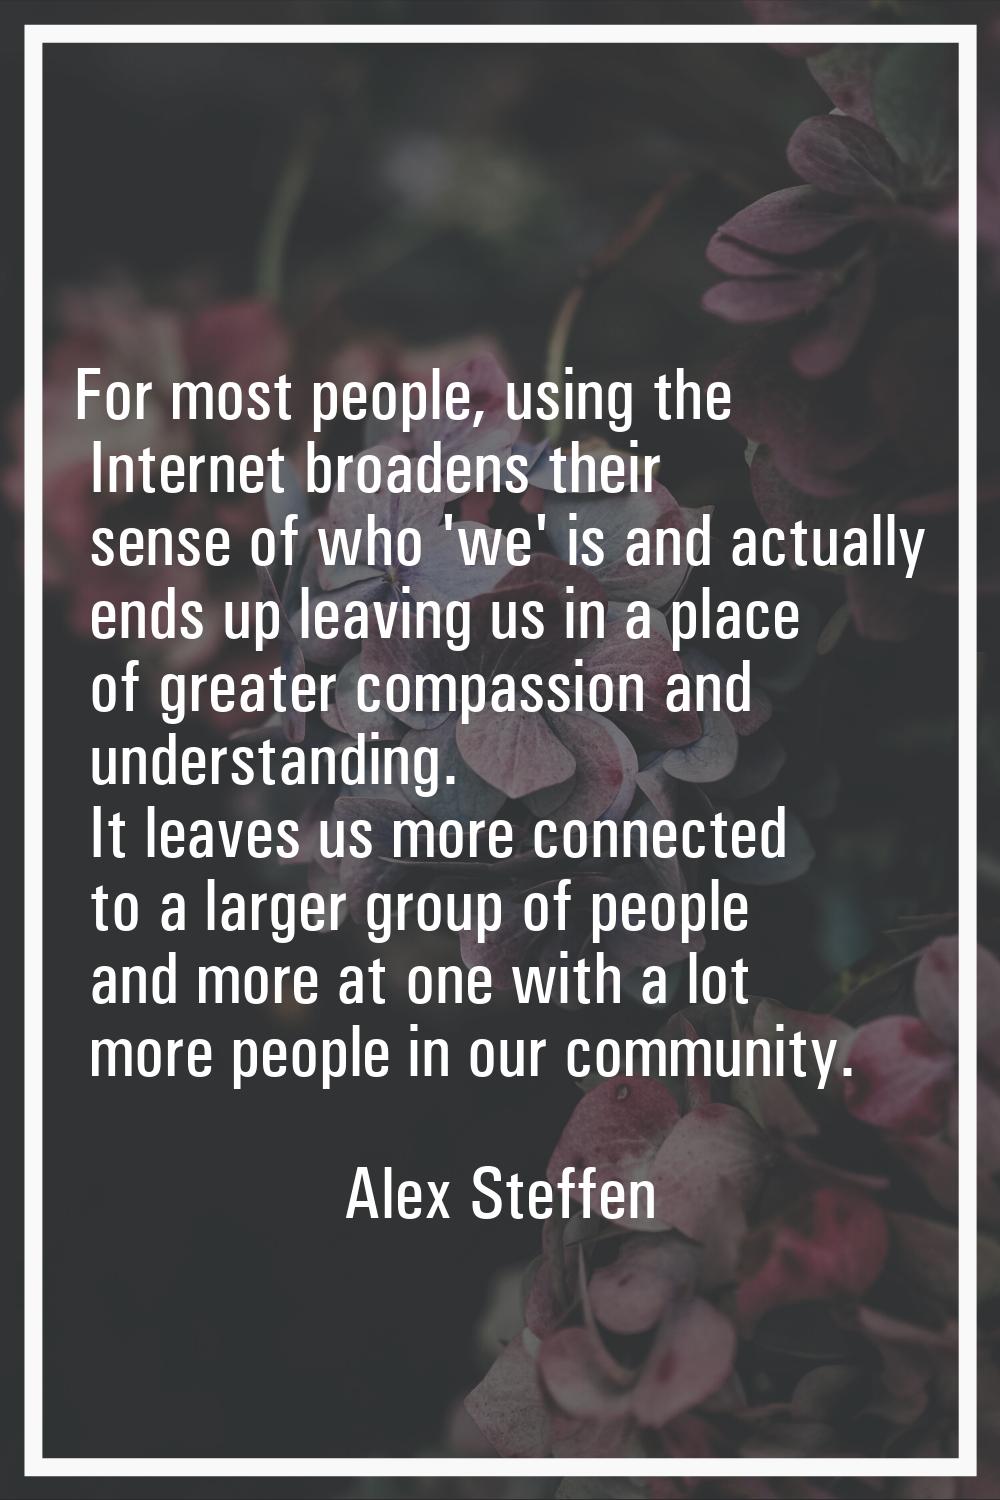 For most people, using the Internet broadens their sense of who 'we' is and actually ends up leavin